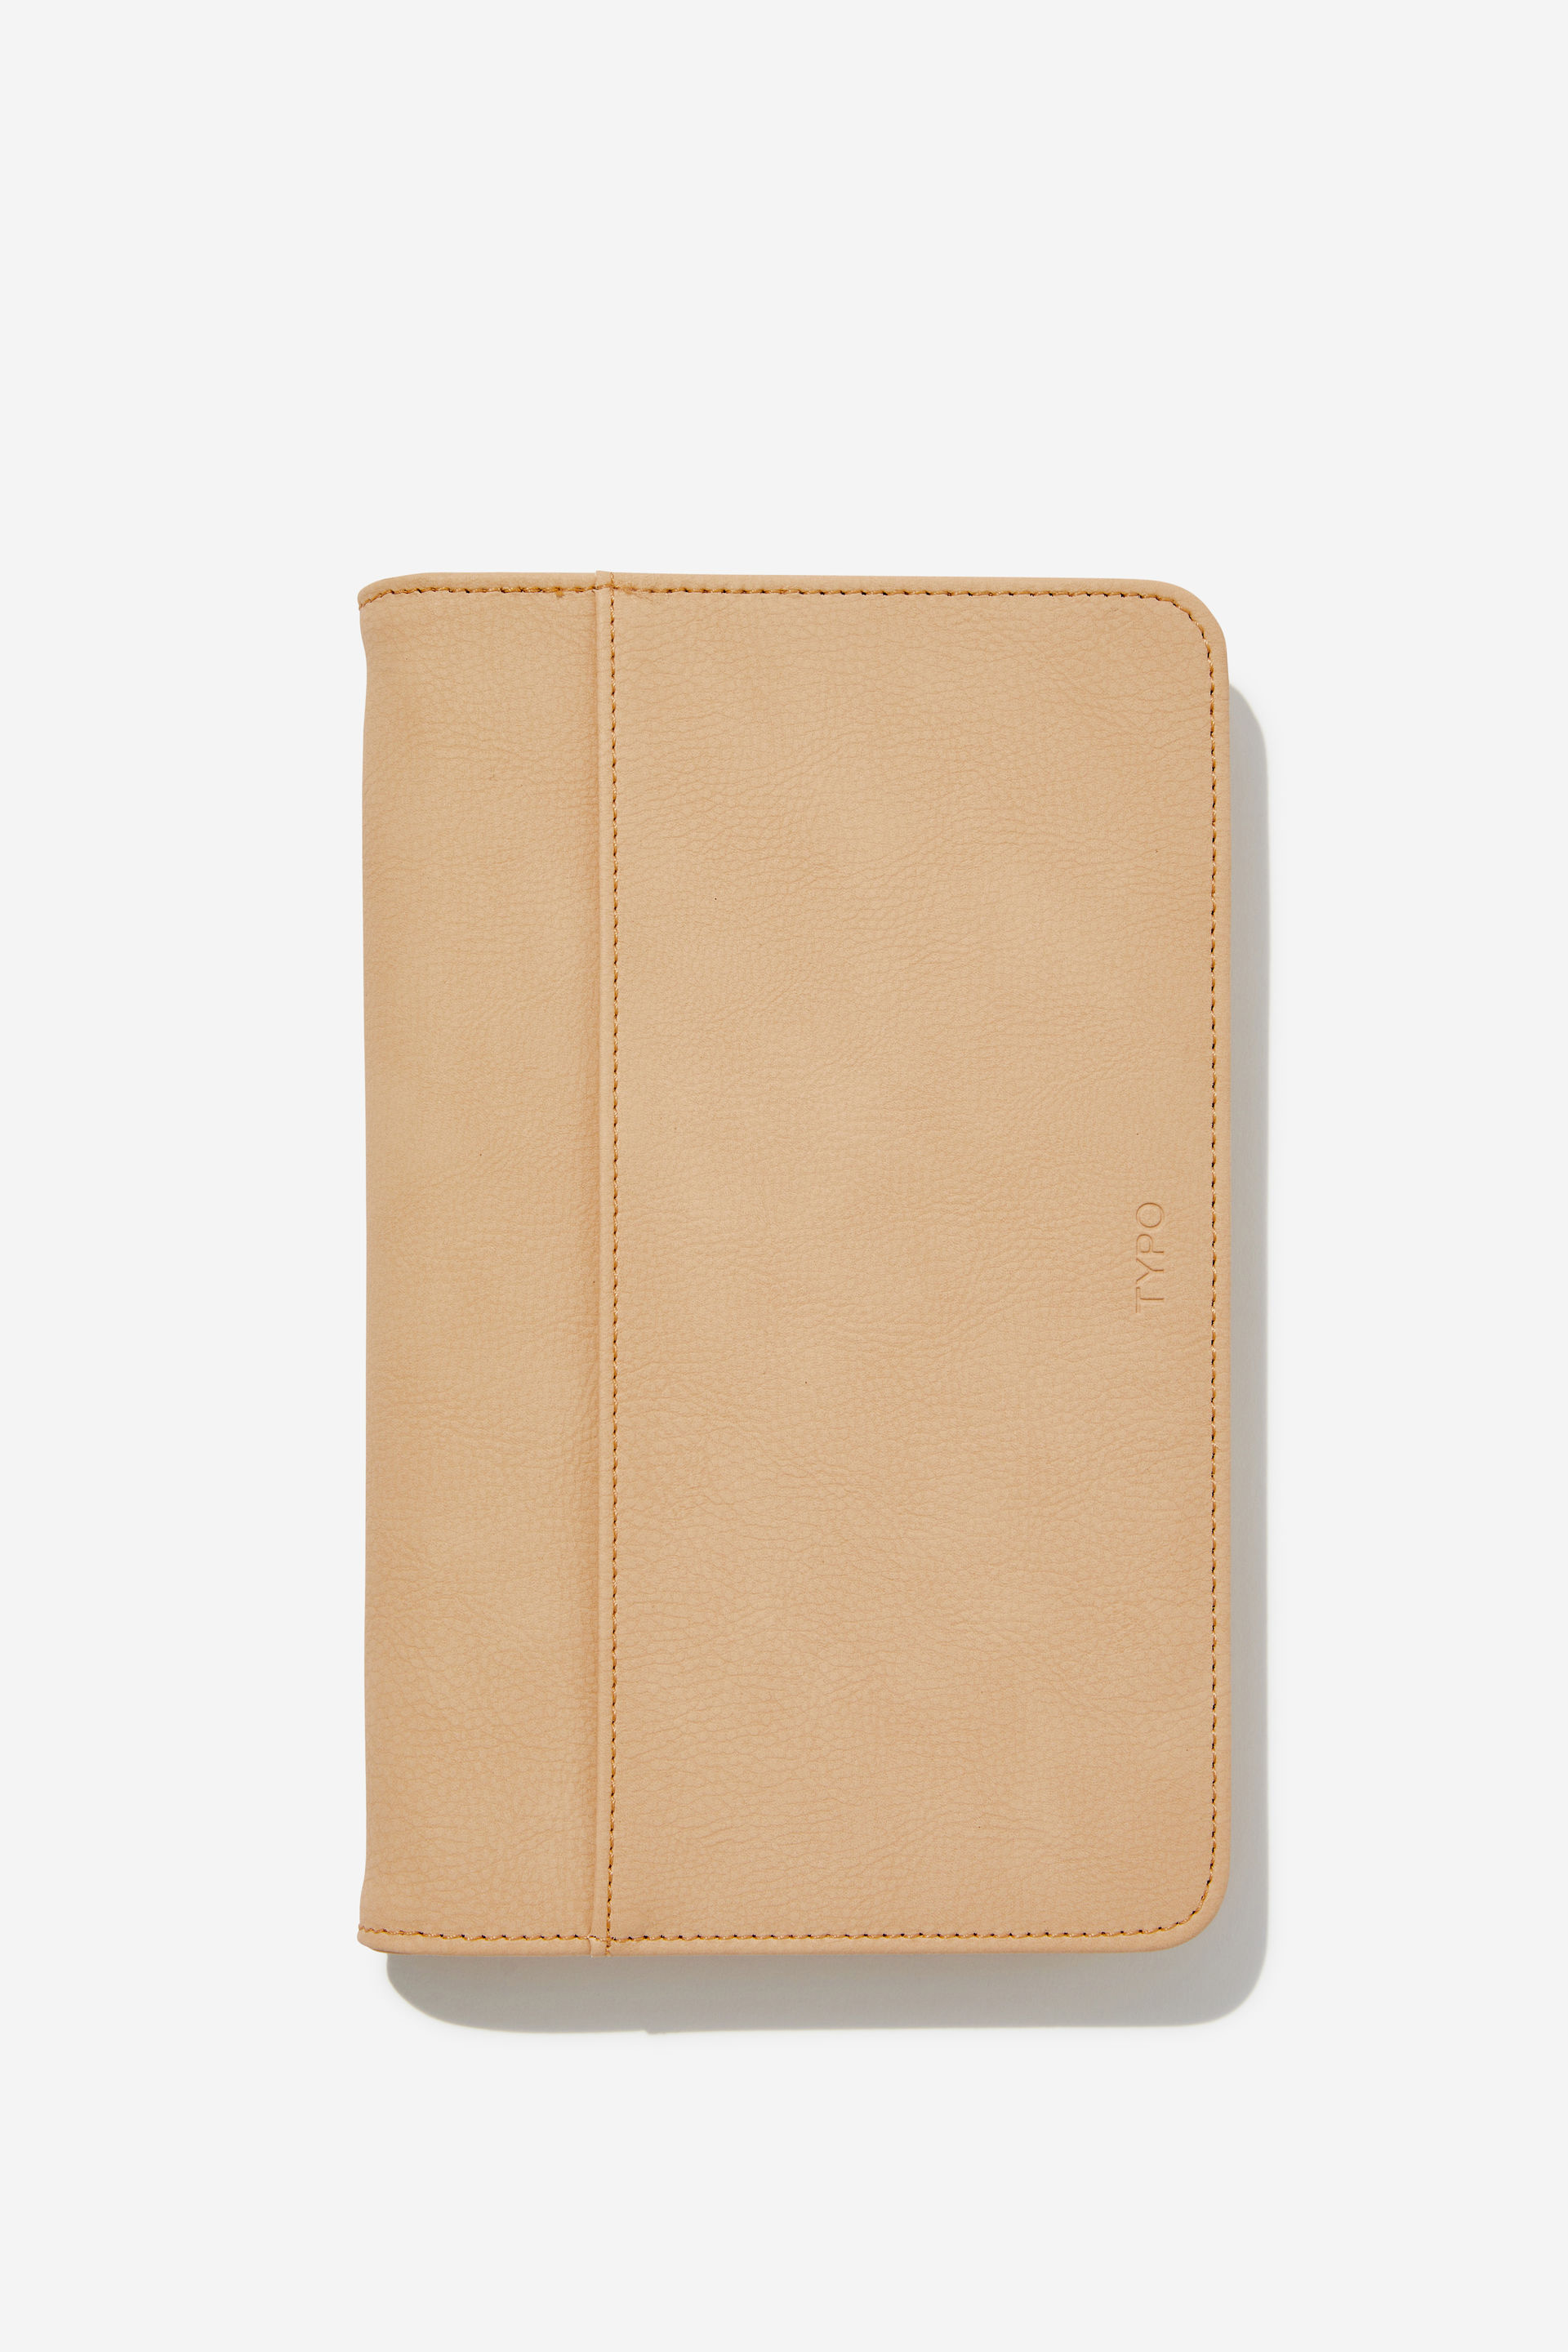 Typo - Off The Grid Travel Wallet - Latte